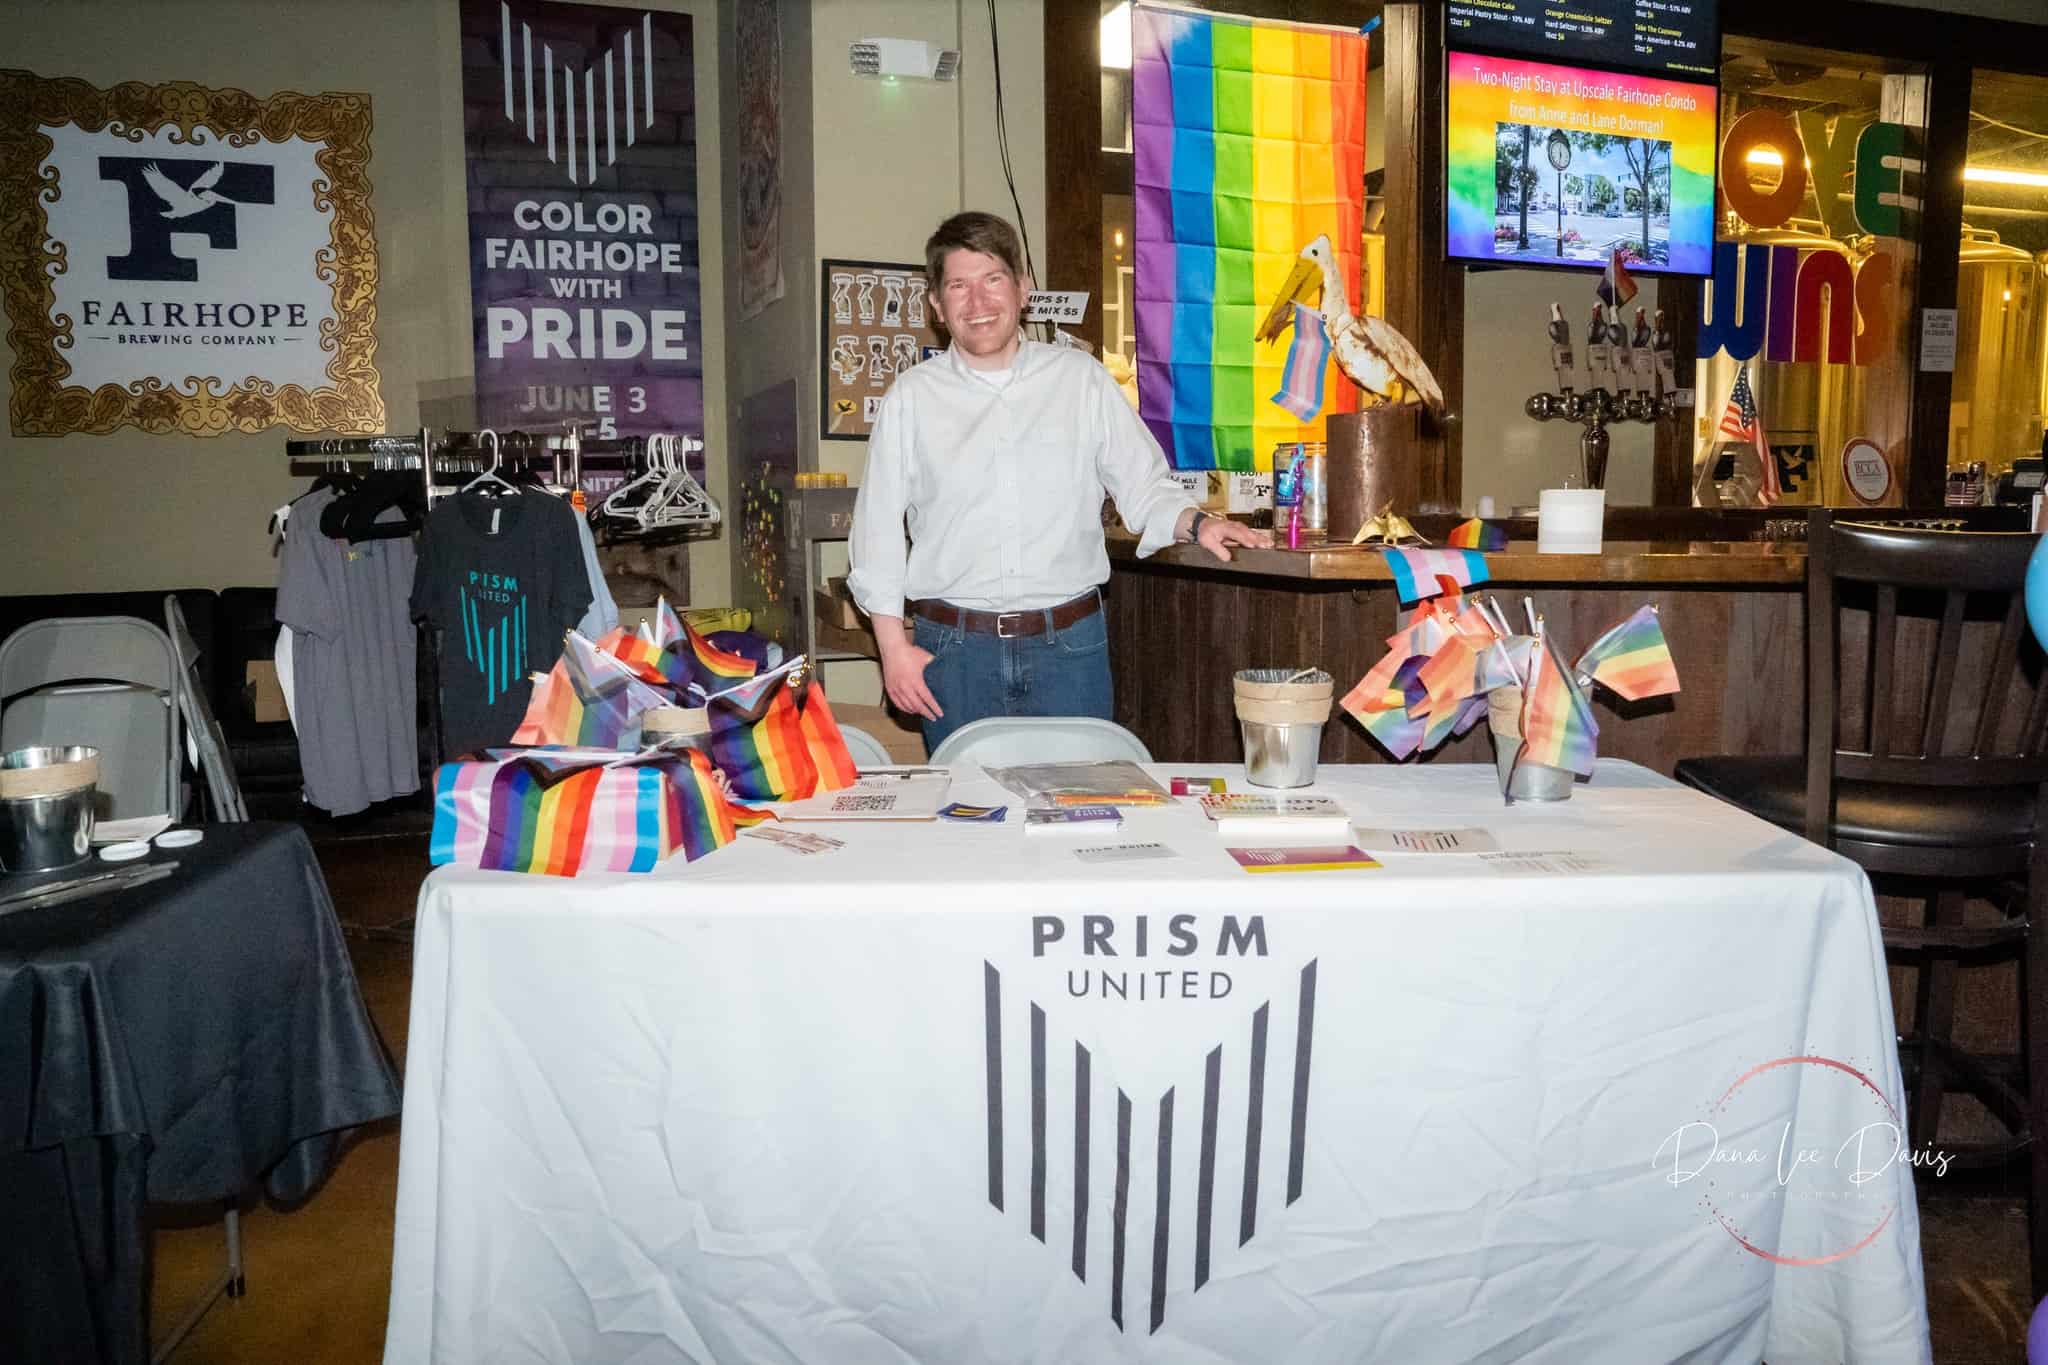 A person standing behind a booth adorned with rainbow flags at an event.